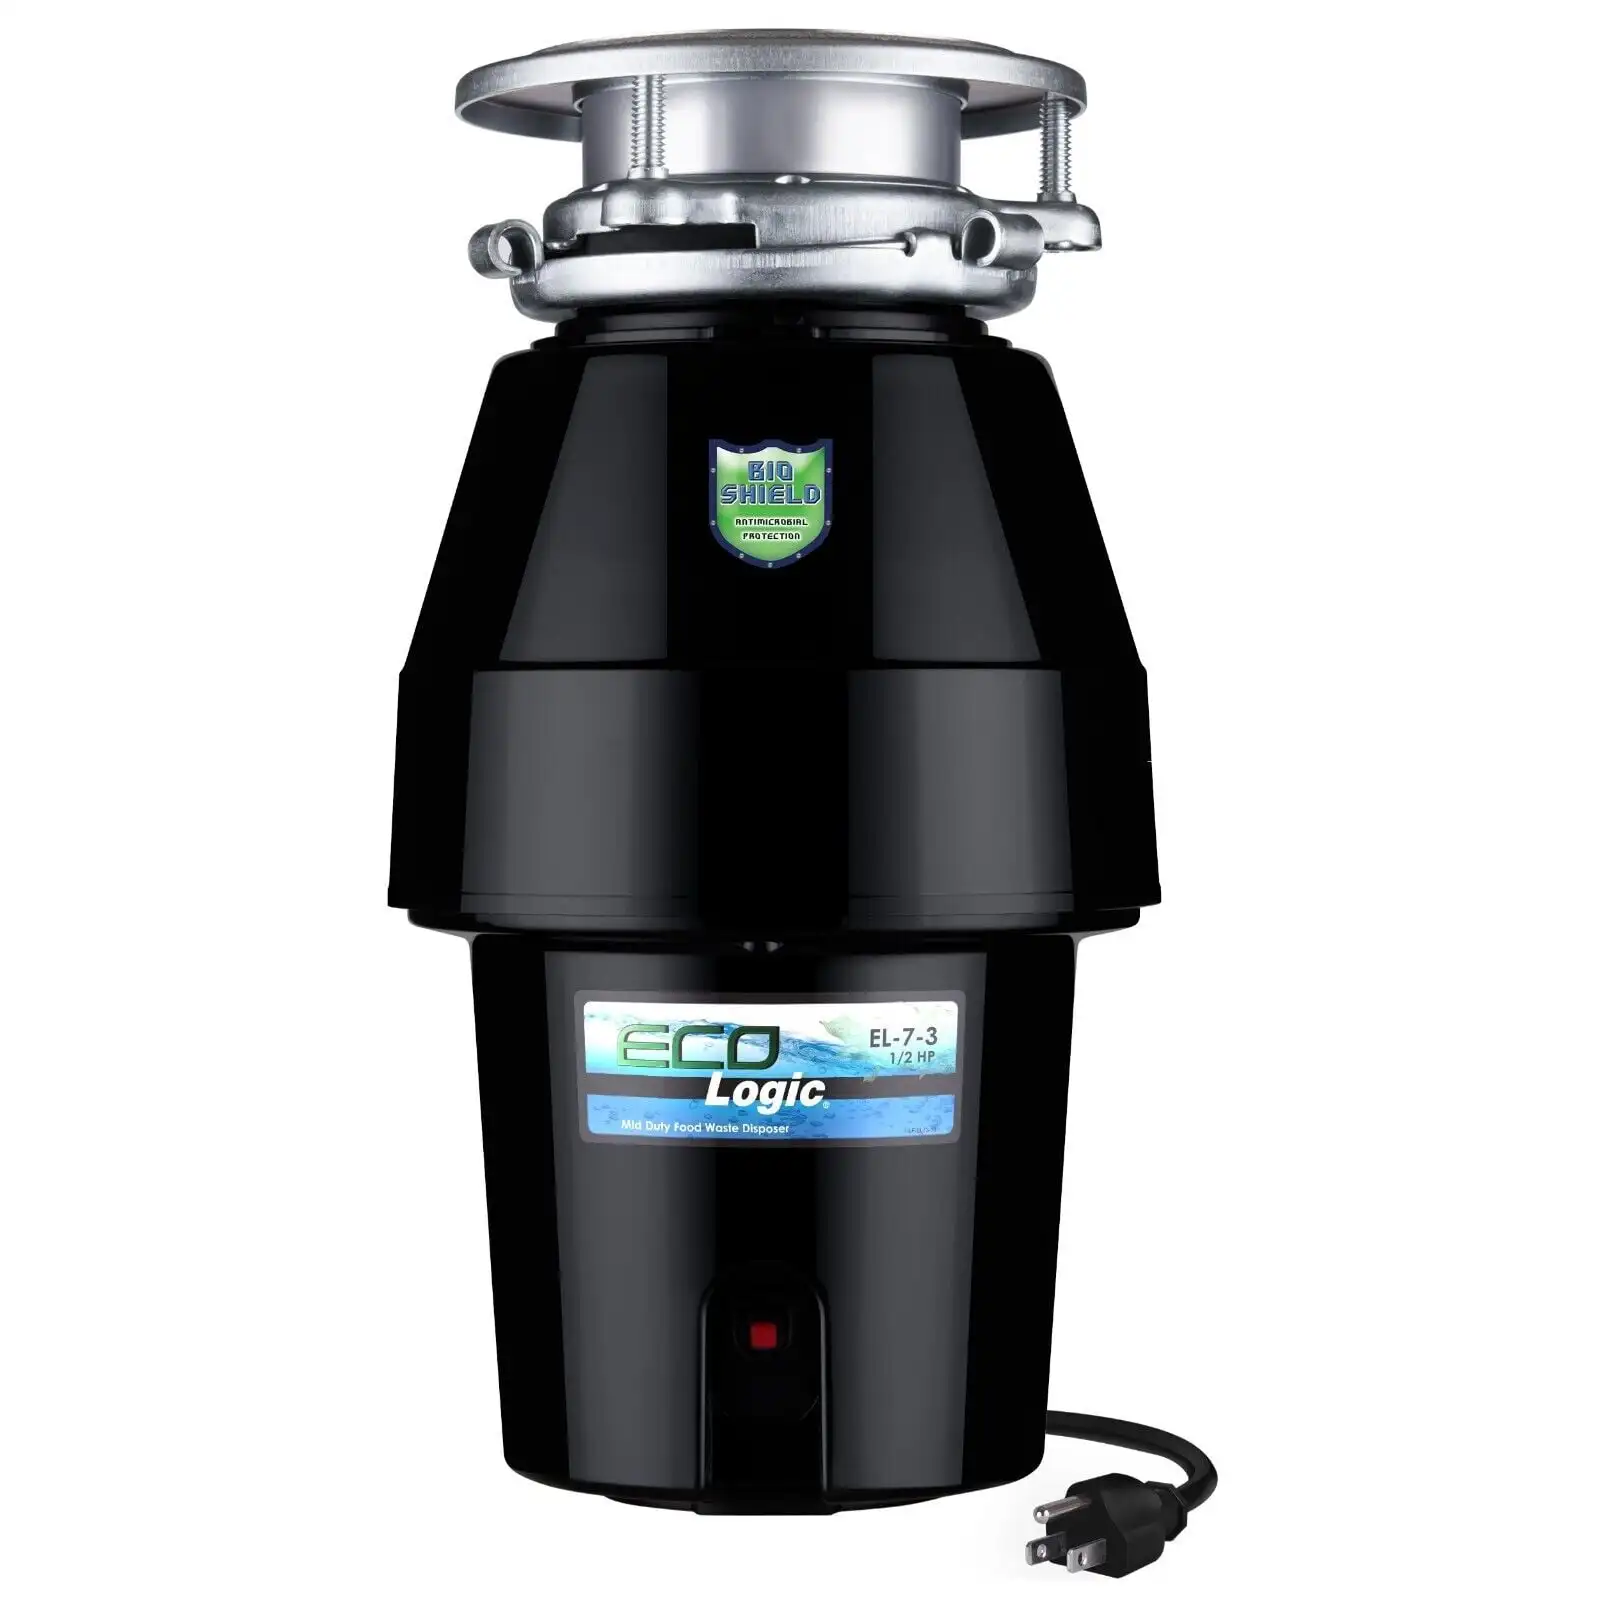 

Eco Logic 1/2 HP Garbage Disposal with Attached Power Cord Eco Logic 1/2 HP Garbage Disposal with Attached Power Cord